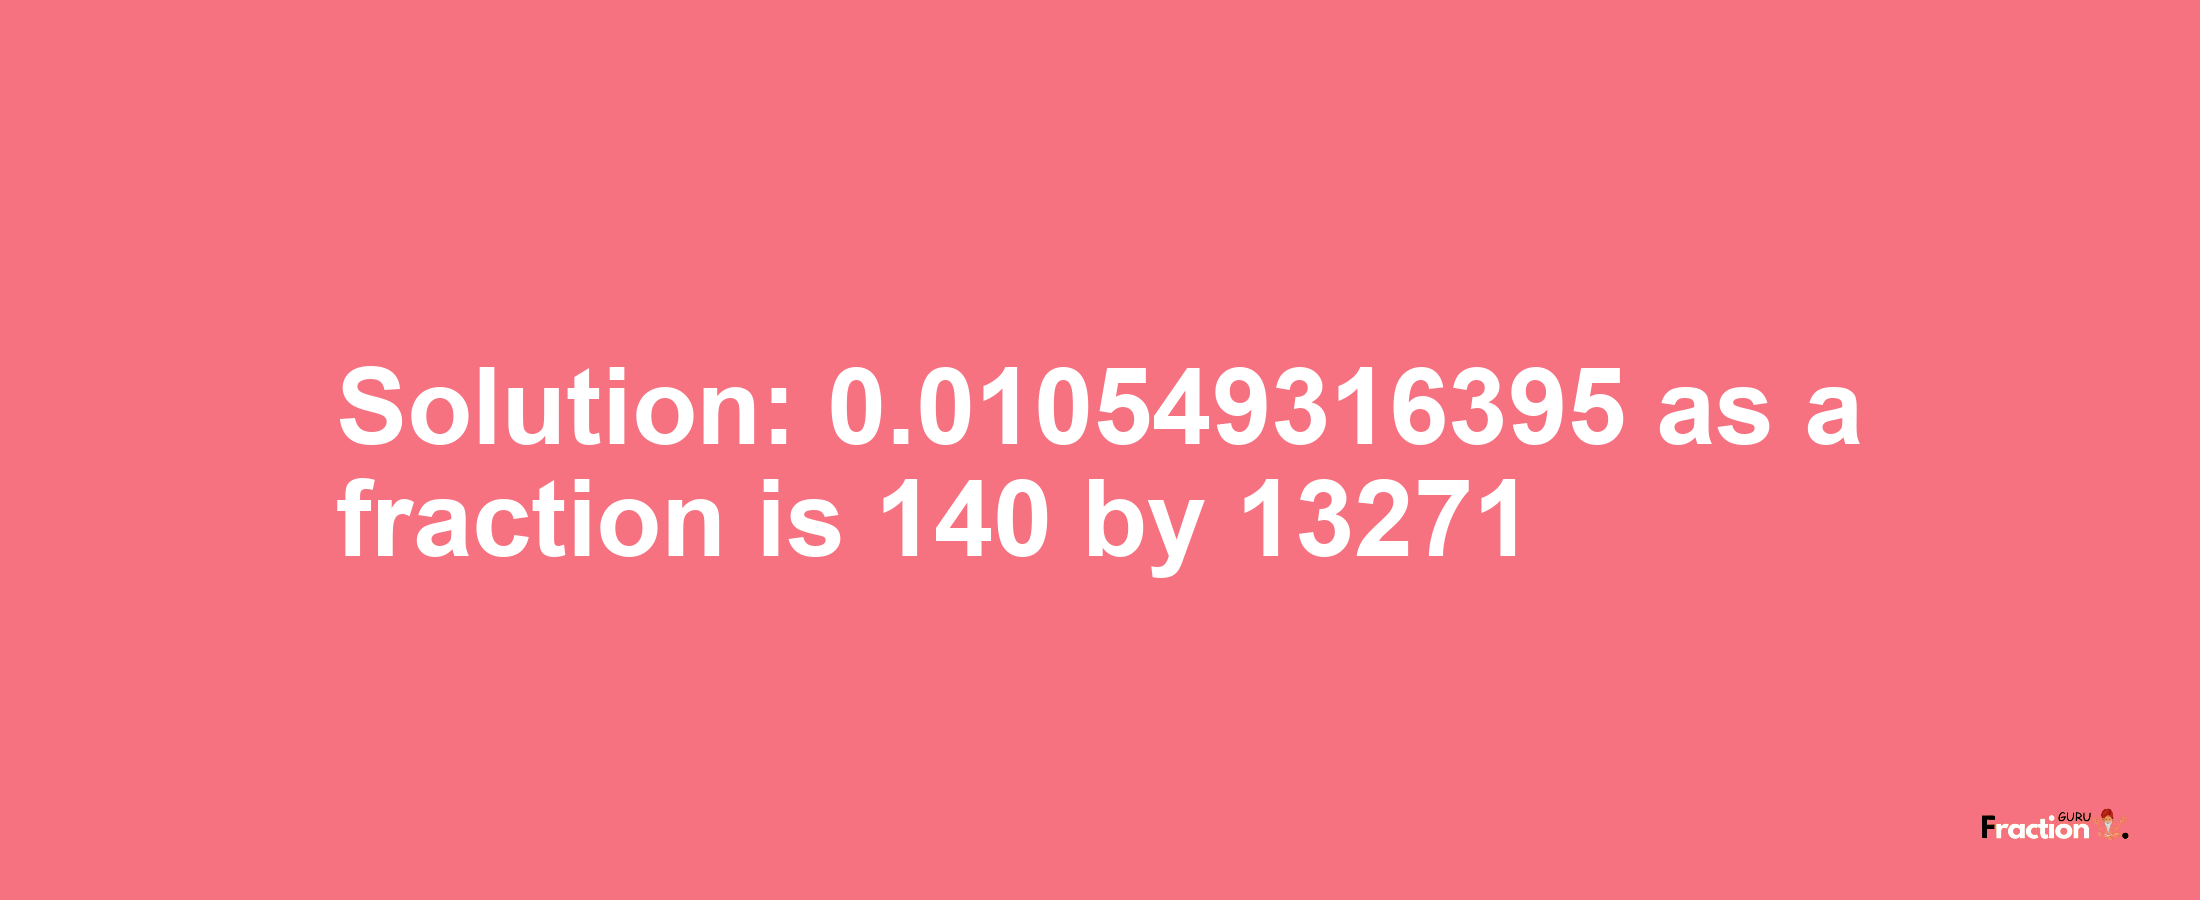 Solution:0.010549316395 as a fraction is 140/13271